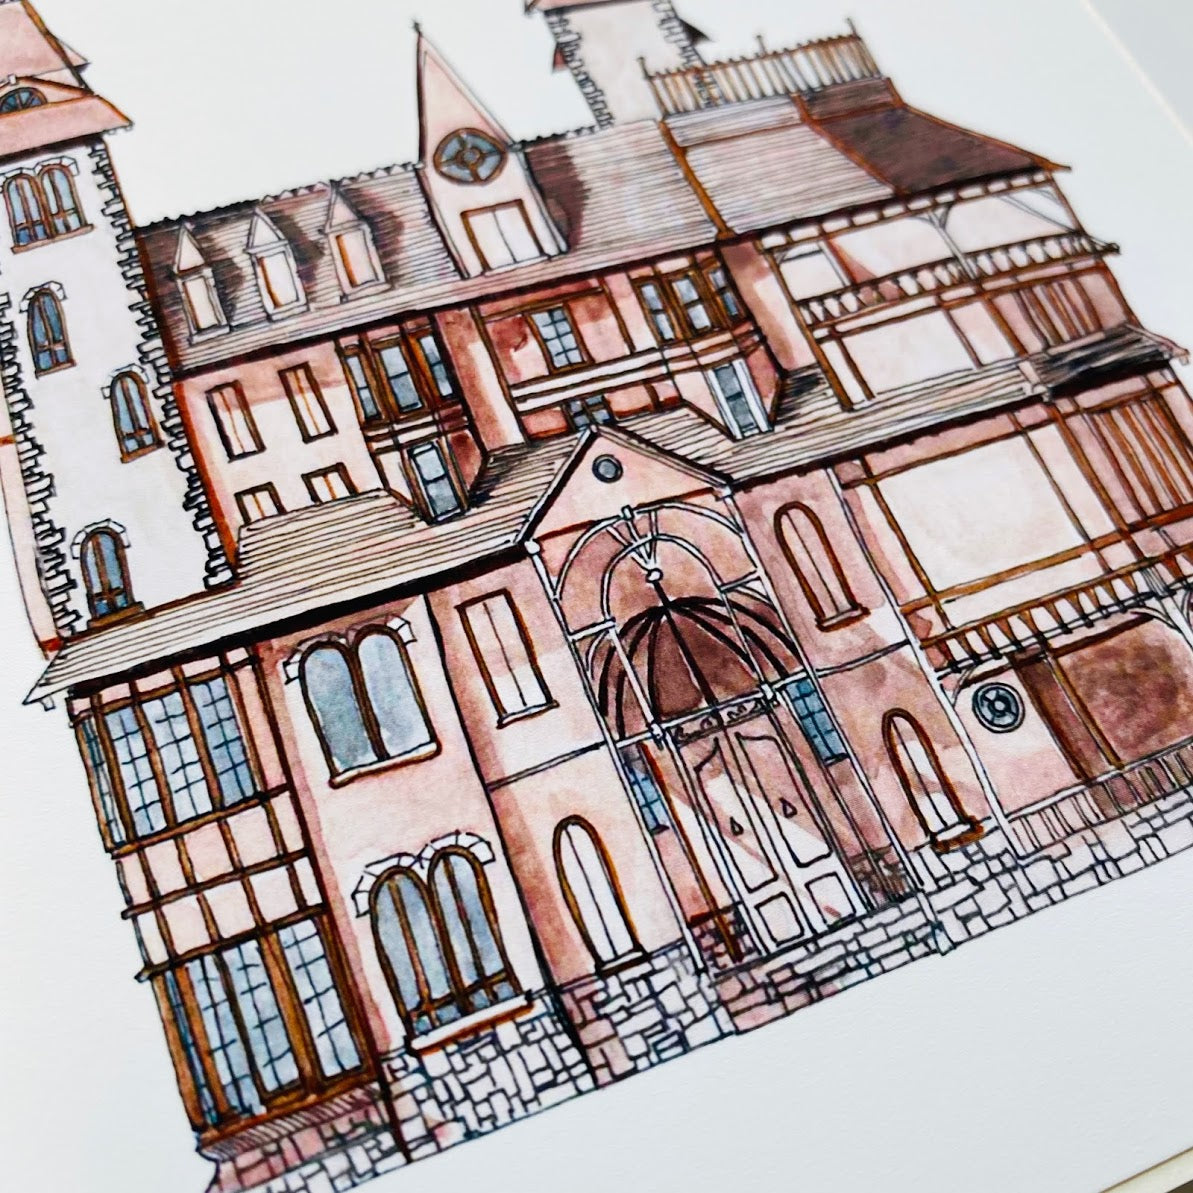 house perspective drawing by cemueller86 on DeviantArt